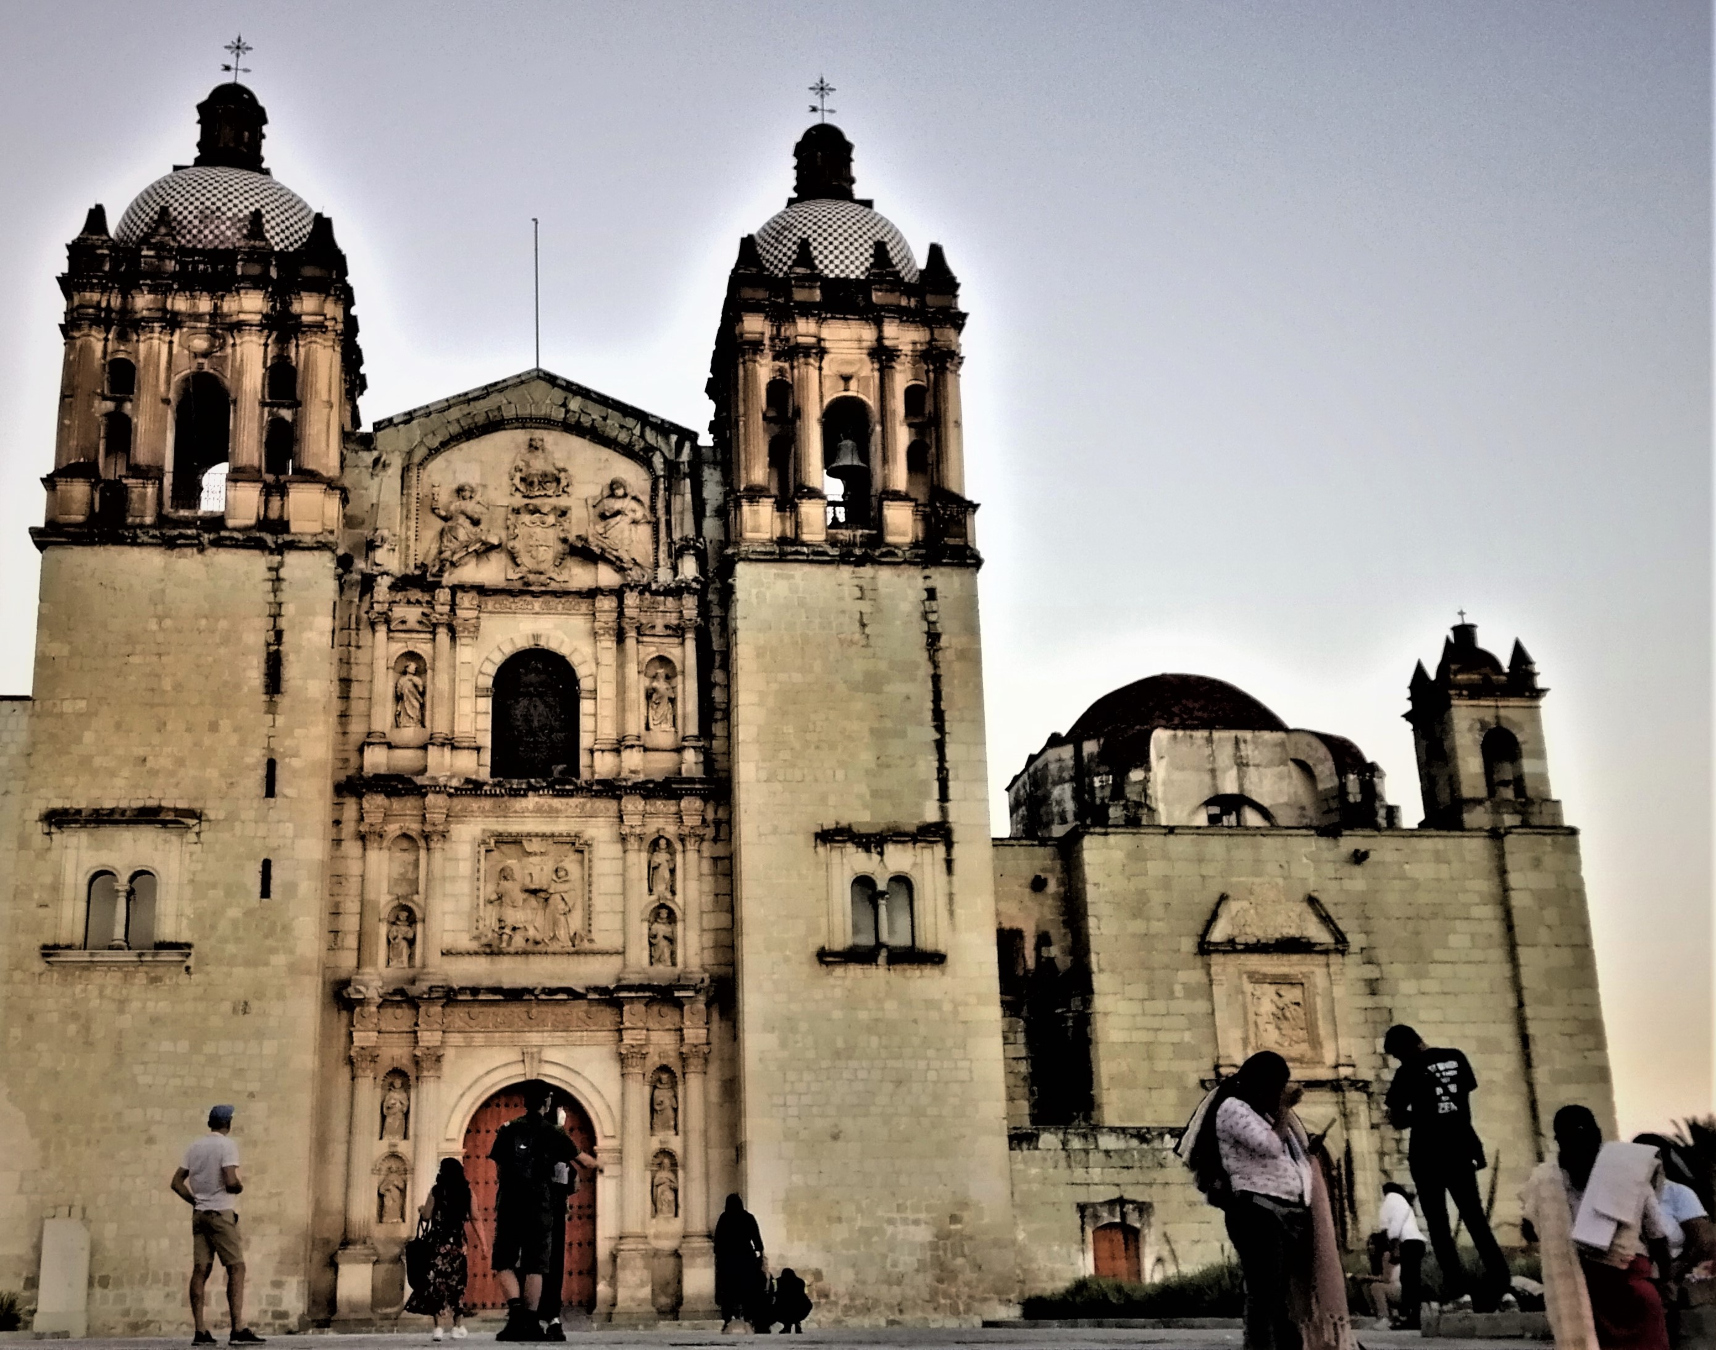 A rustic church and people in Oaxaca City, Mexico.